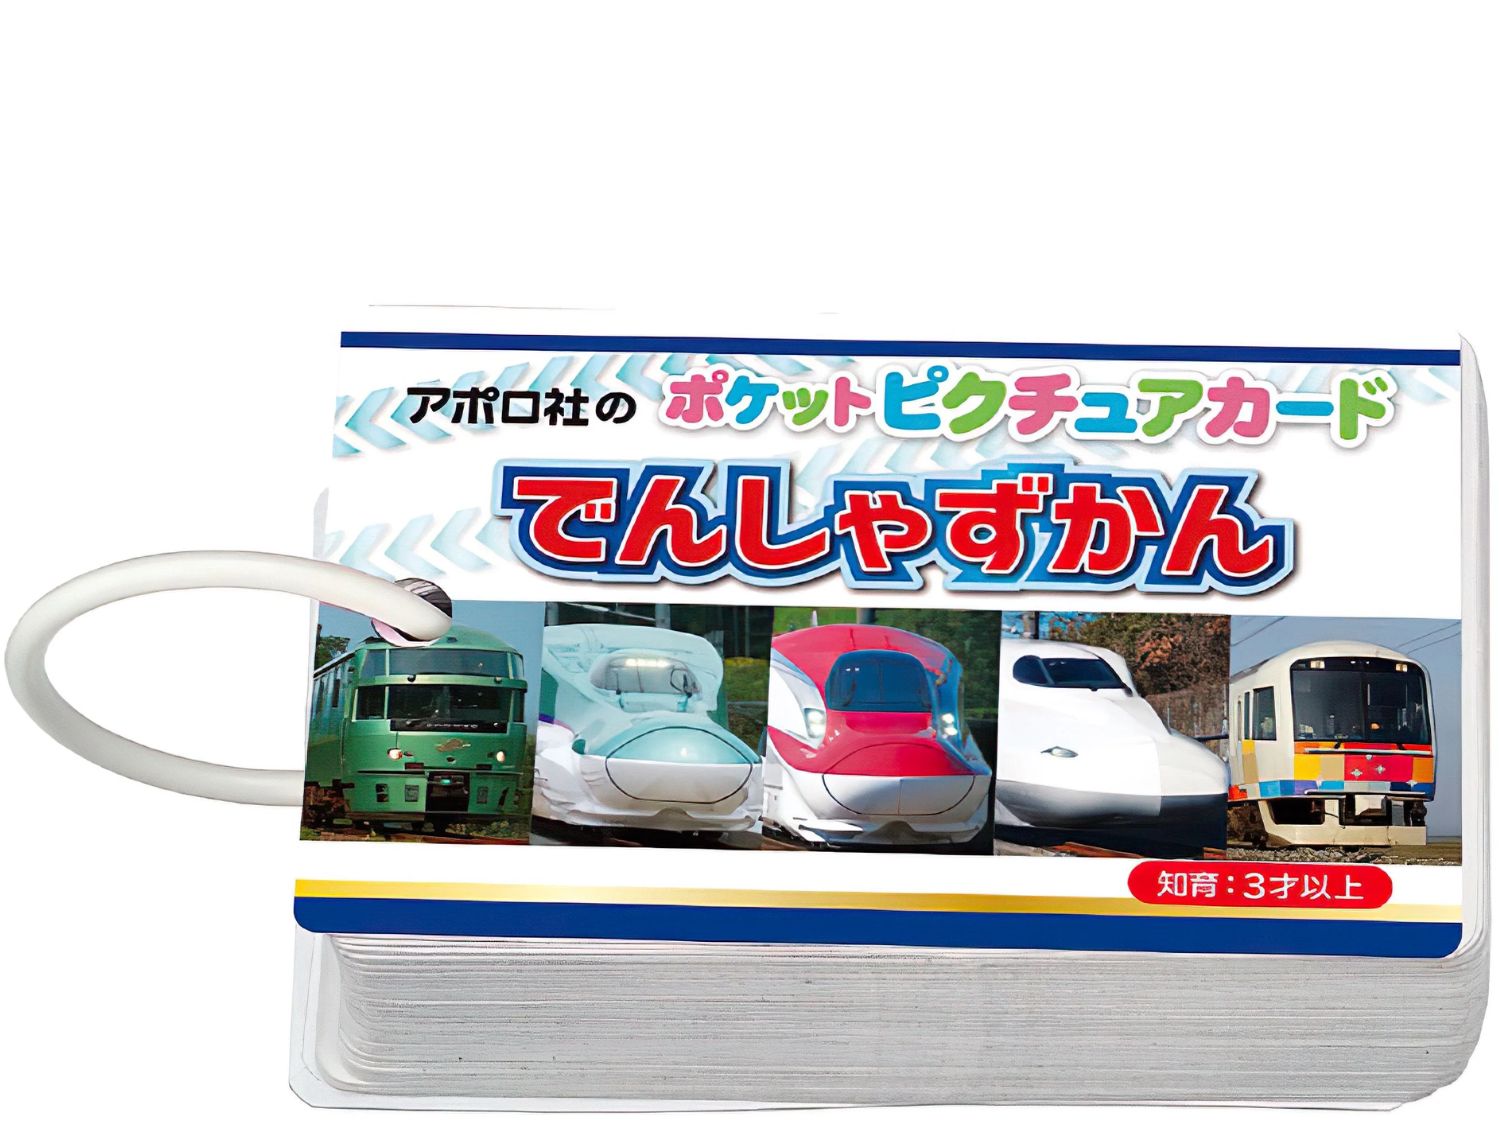 Apollo • Vehicle • Trains　Pocket Picture Card